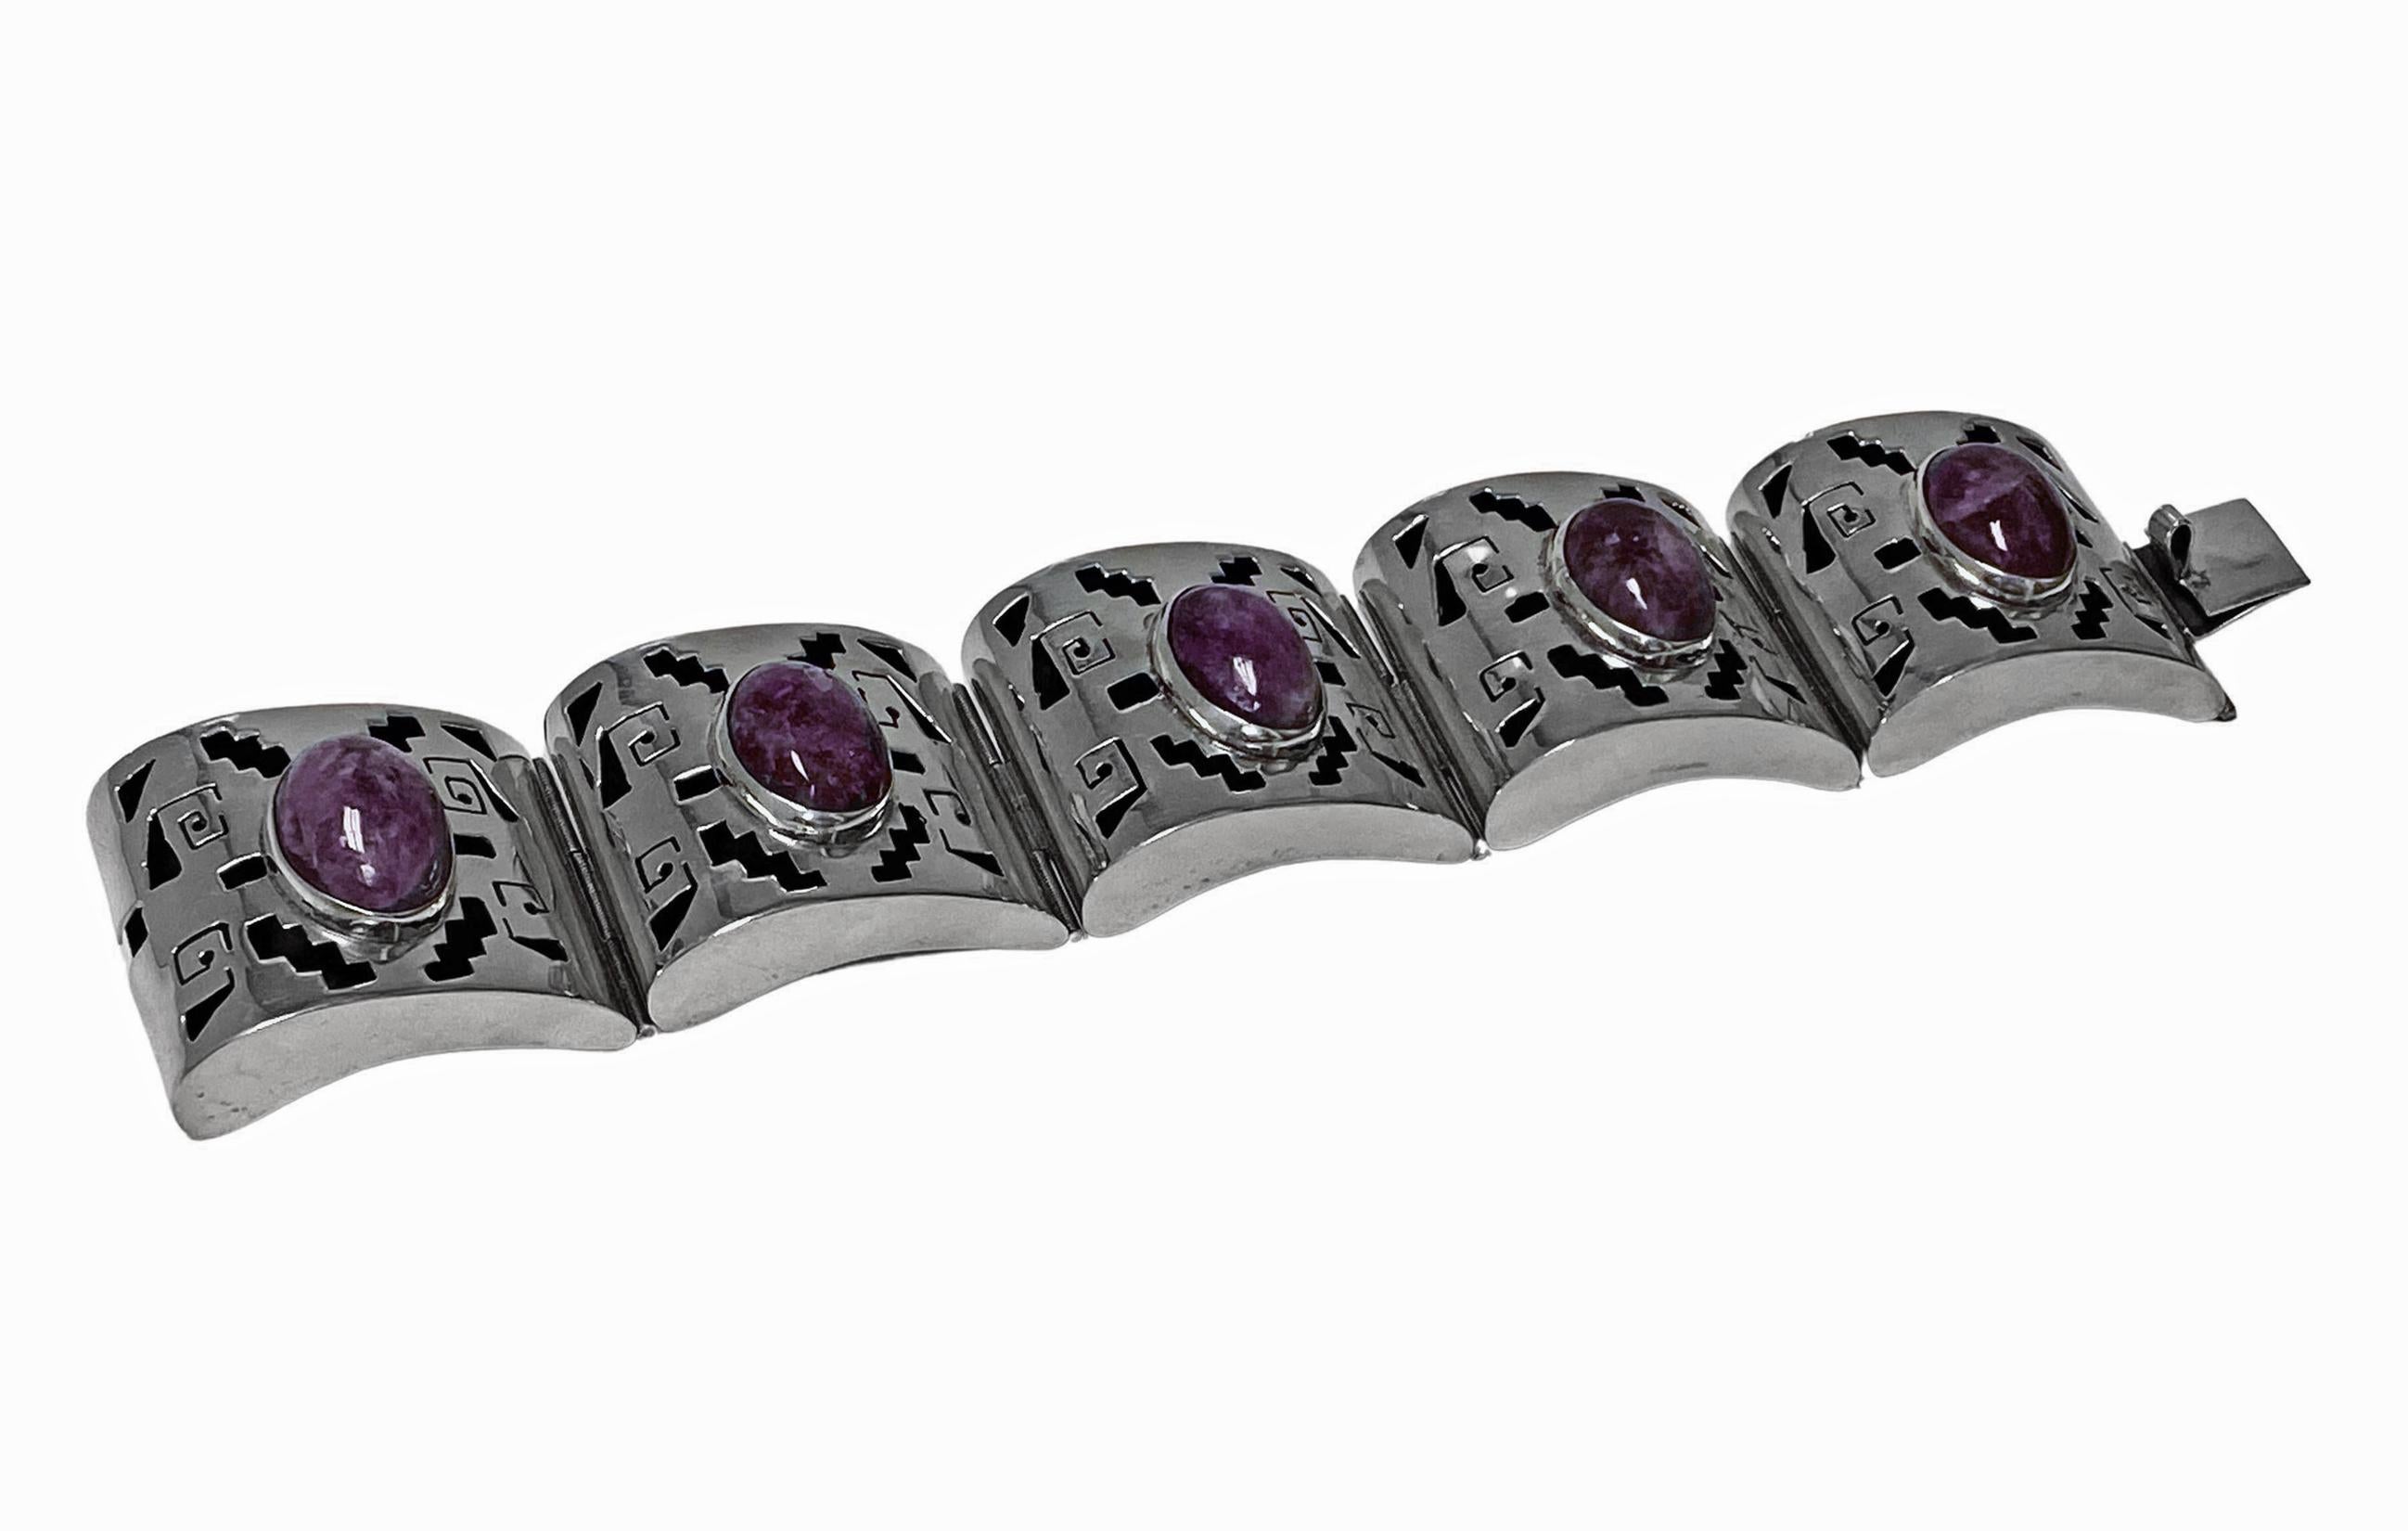 1940’s Mexican Amethyst Sterling Bracelet. The large bracelet with five section panels in curvilinear shape conforming to wrist, each with shadow cut out box design and bezel set with cabochon amethyst. Tongue and box clasp fastener. Length: 7.25